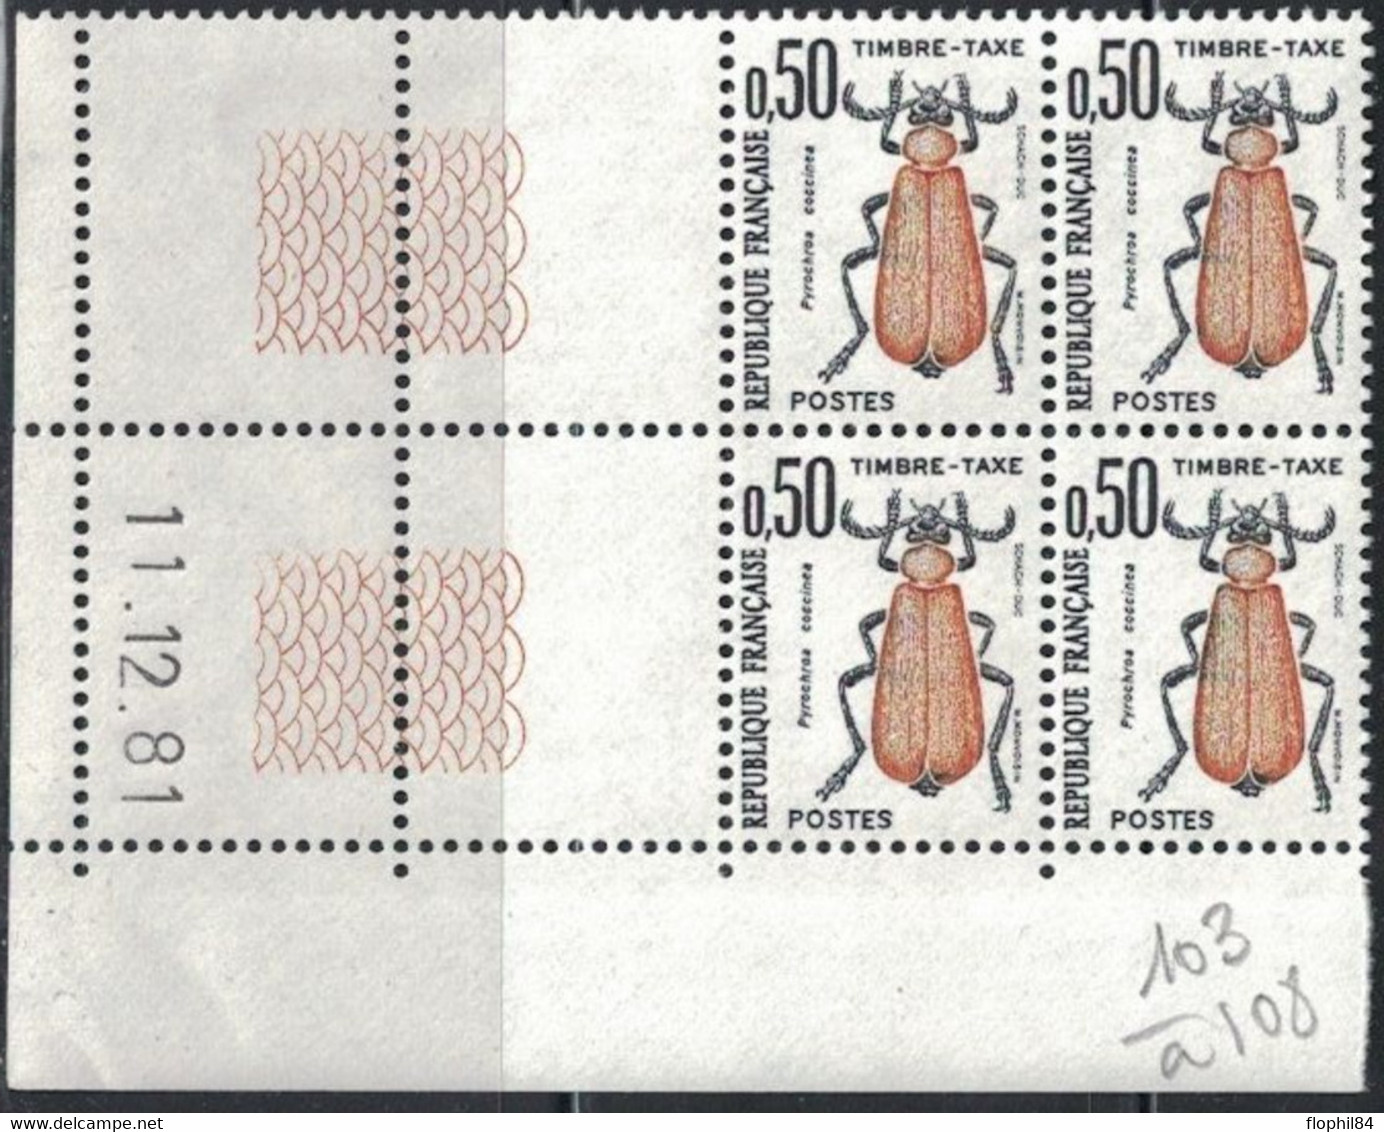 INSECTES - TAXE - N°105 -  BLOC DE 4 - COIN DATE - 11-12-1981 - COTE 1€50. - Strafport